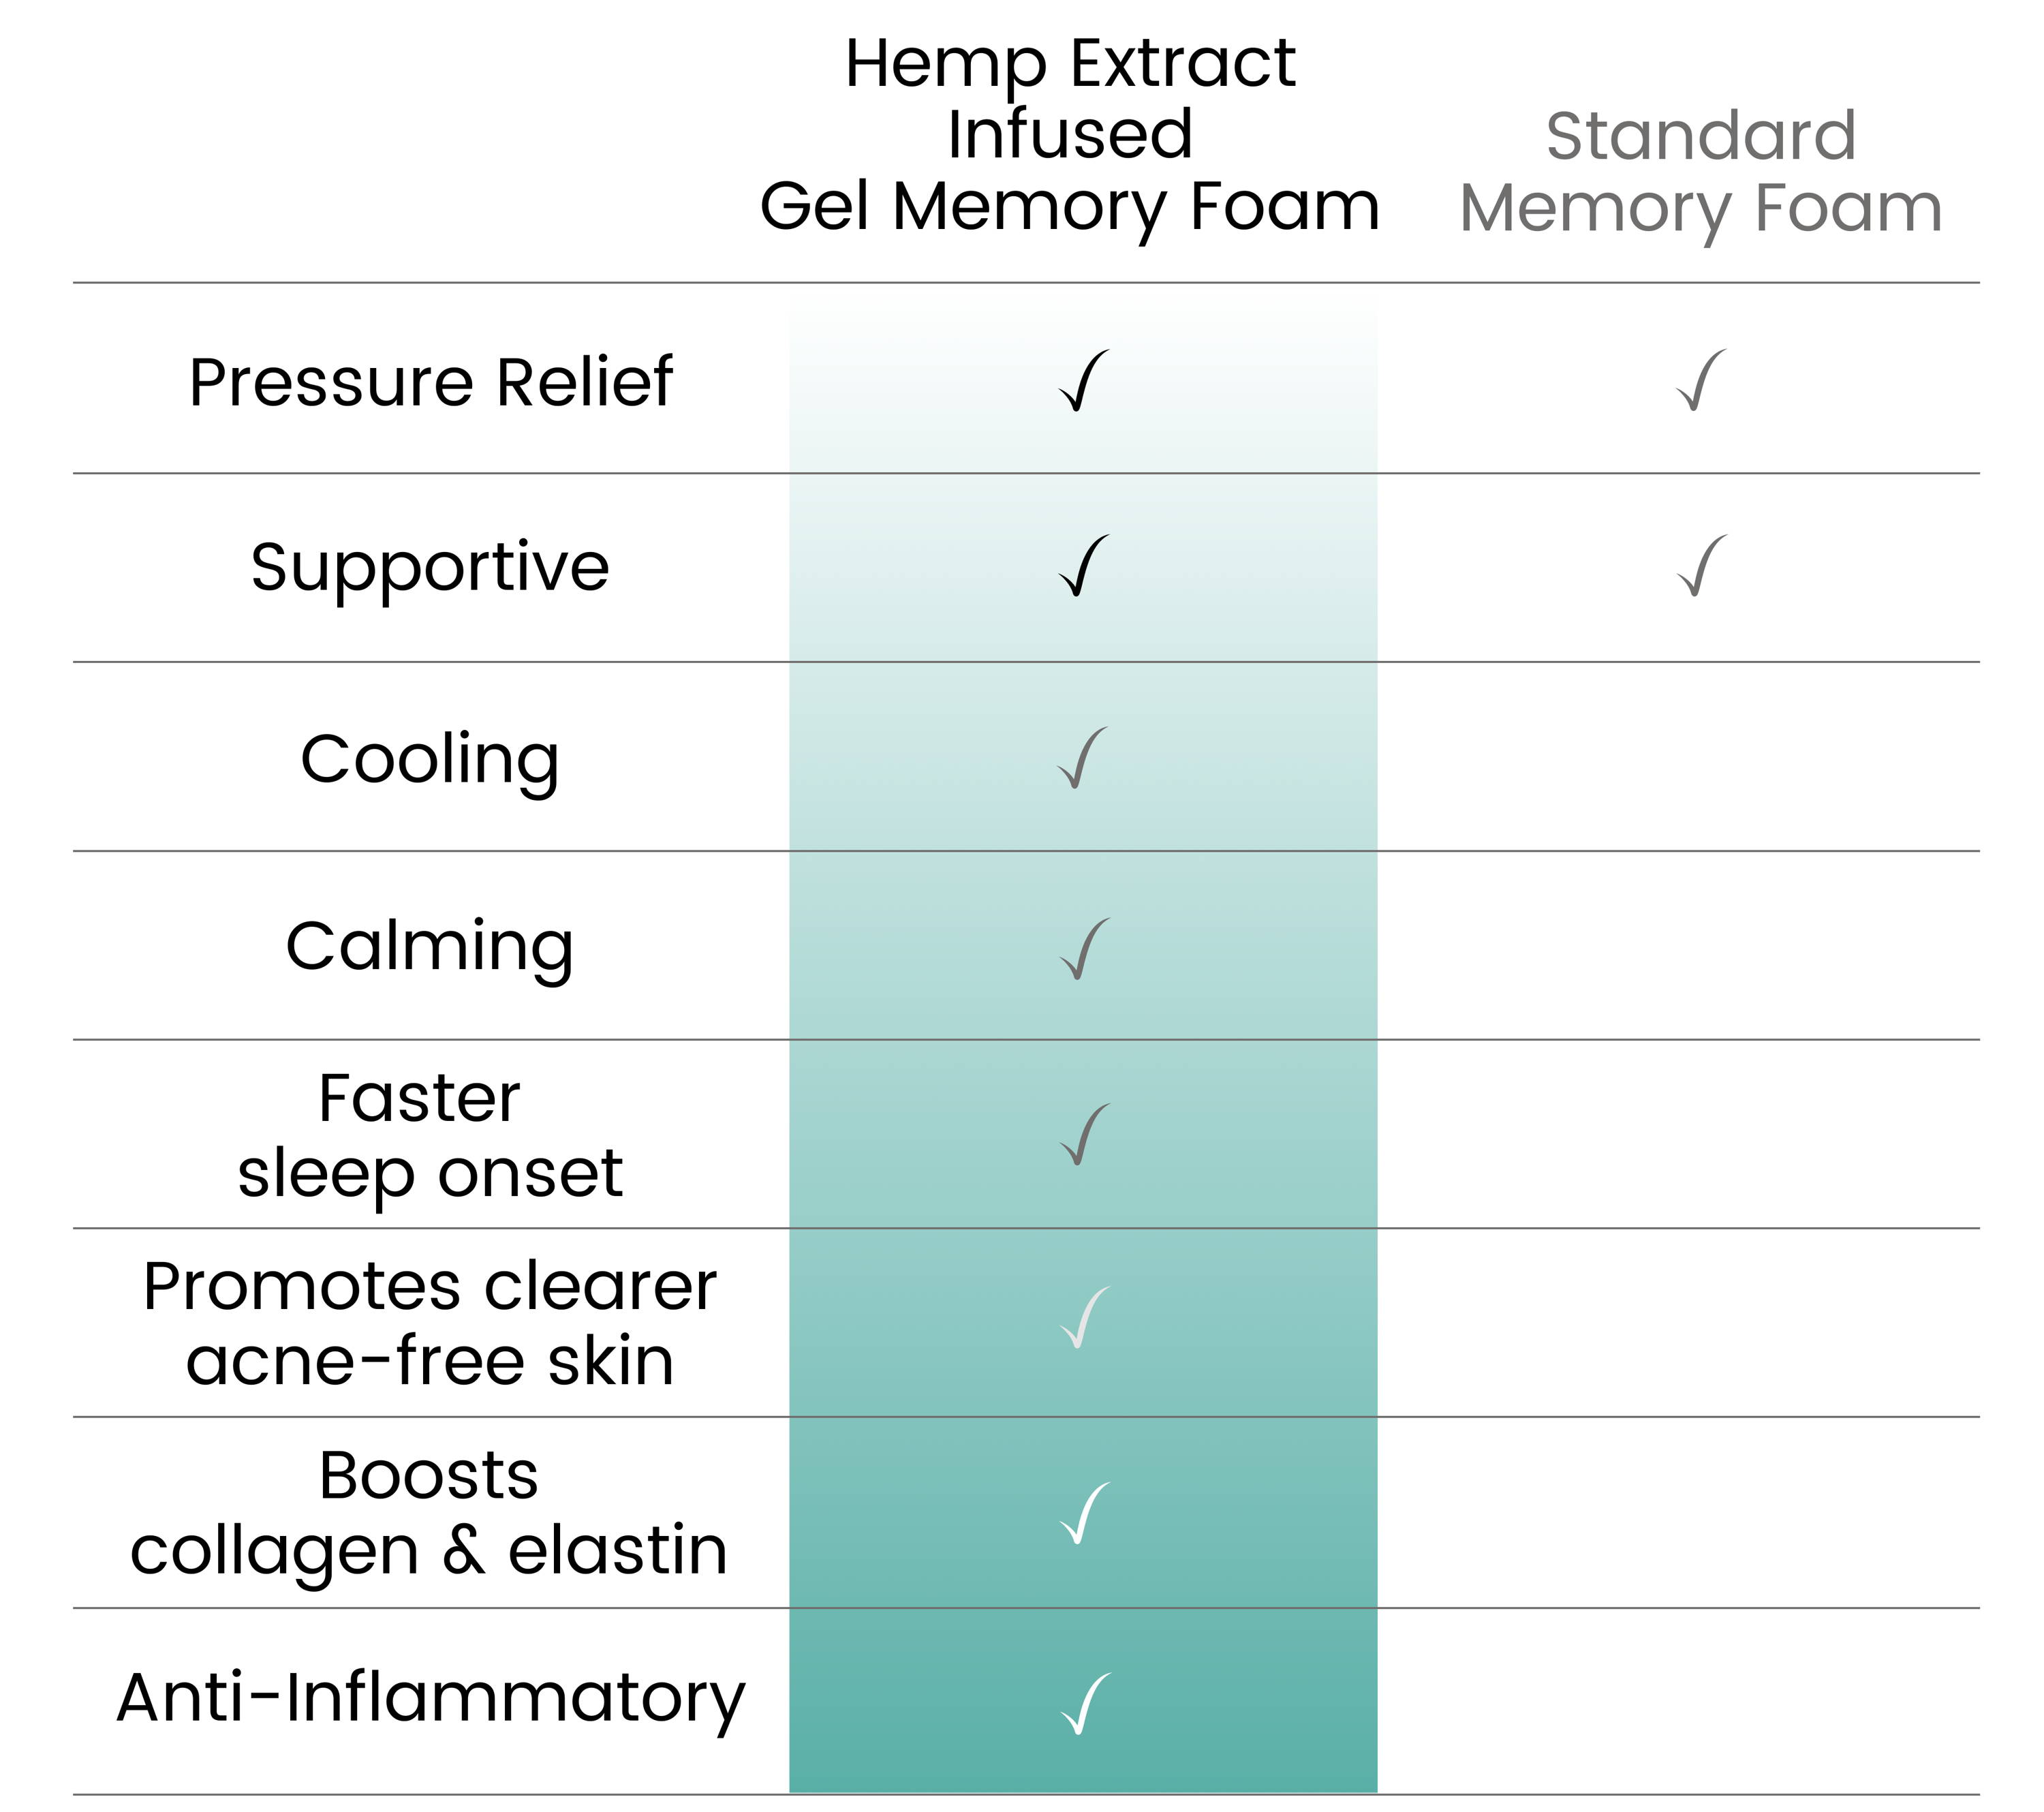 Ergo-Pedic's CBD memory foam has the benefits of pressure relief, support, cooling, calming, faster sleep onset, promotes clearer acne-free skin, boosts collagen and elastin, and is anti-inflammatory.